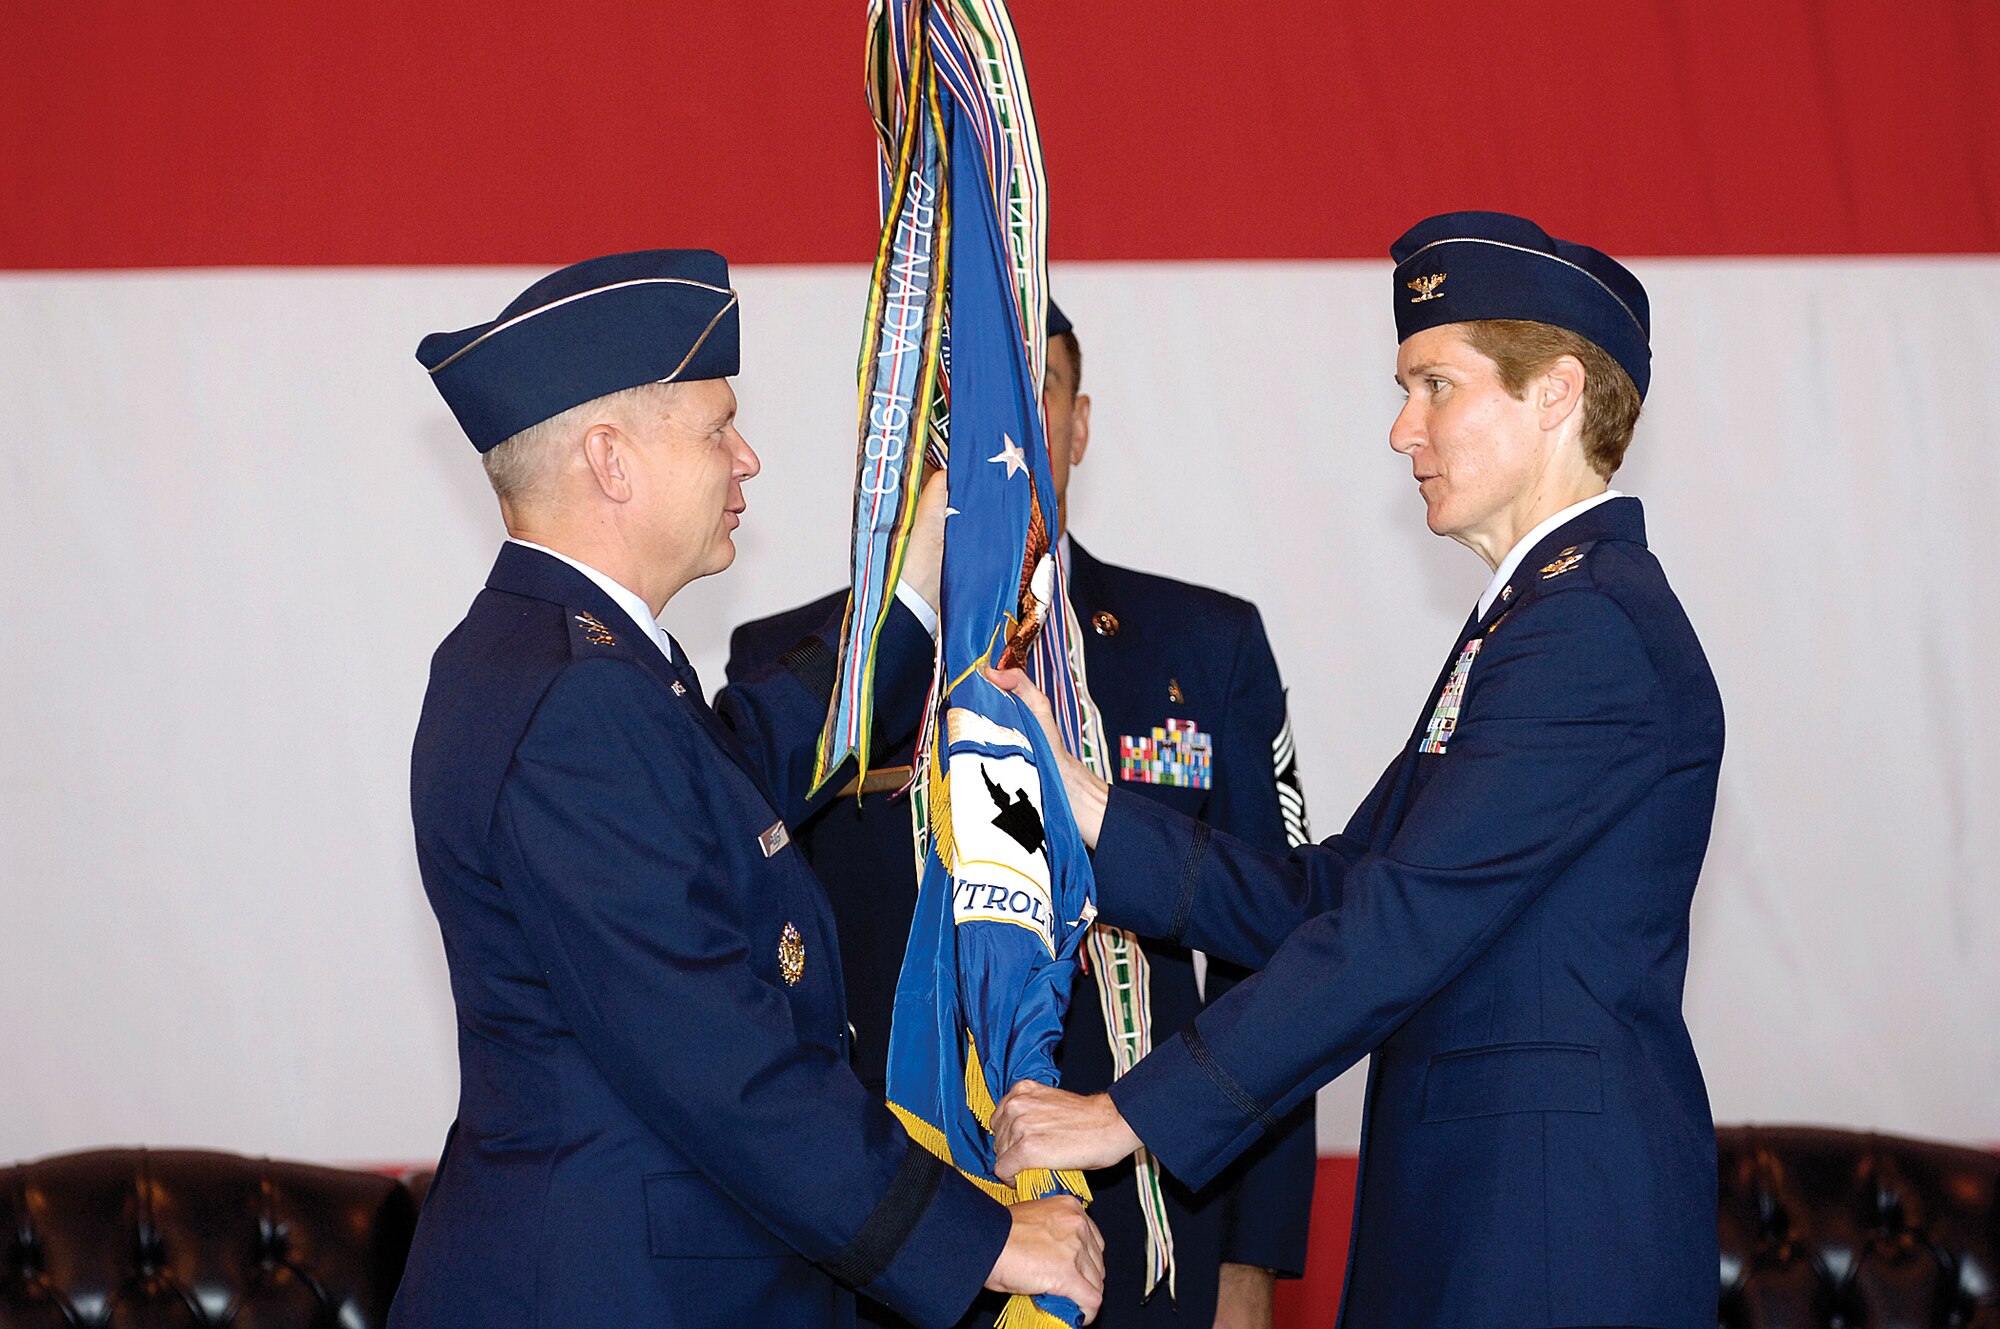 In an Aug. 27 ceremony witnessed by hundreds of Airmen, Civilians and community leaders, Lt. Gen. Robert Elder Jr. confers command of the 552nd Air Control Wing to Col. Patricia Hoffman.  General Elder Jr. is the commander of the 8th Air Force, Barksdale Air Force Base, La., and the Joint Functional Component commander for Global Strike and Integration, U.S. Strategic Command, Offutt AFB, Neb. (Air Force photo/Margo Wright)
